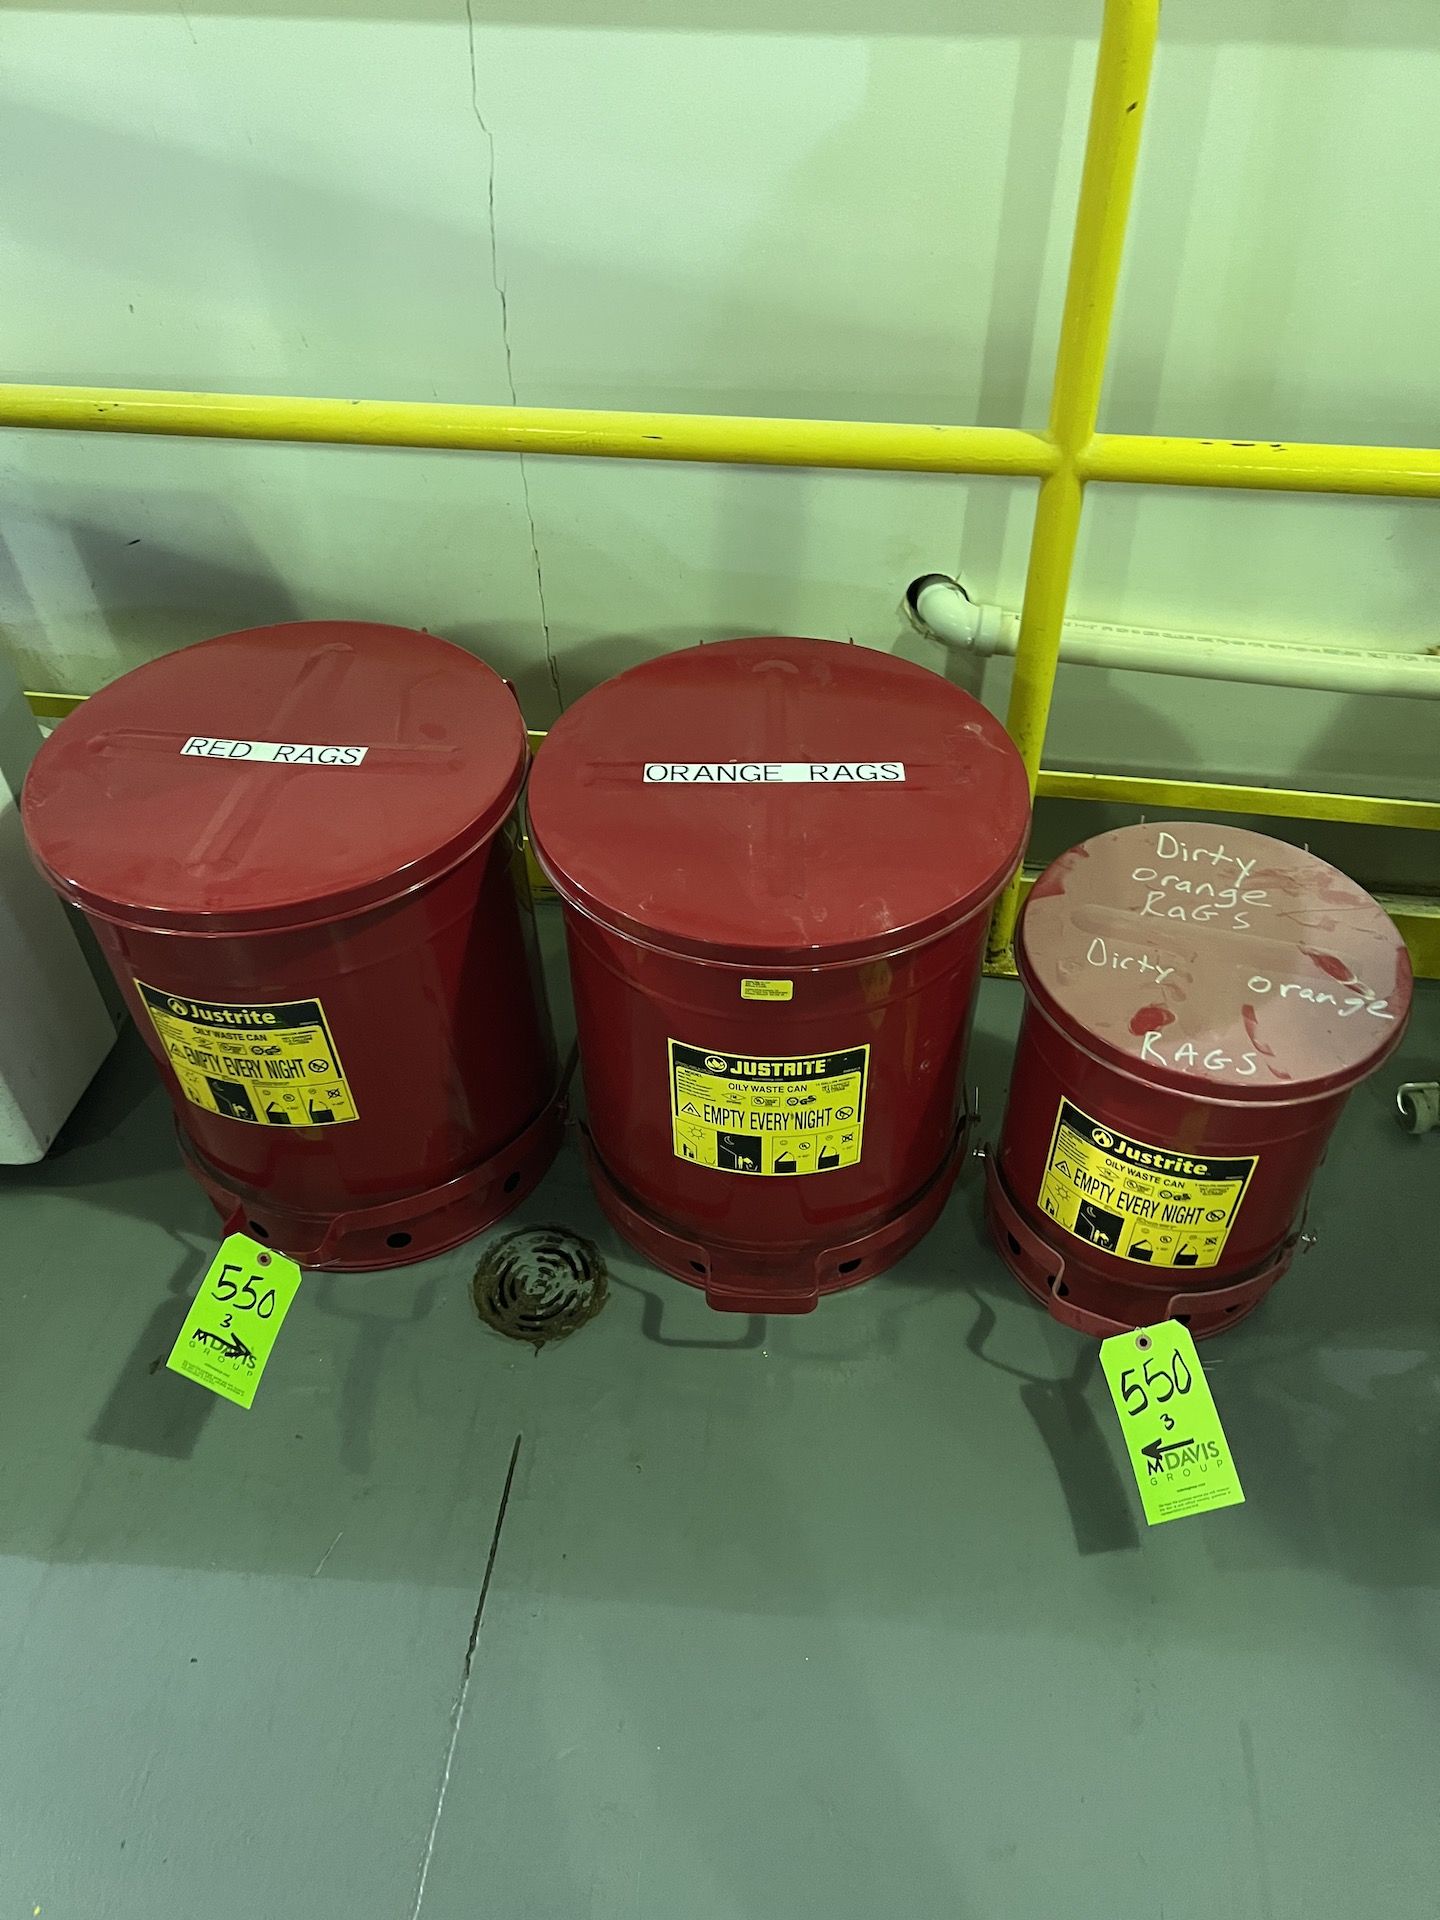 (3) JUSTRITE OILY WASTE CANS